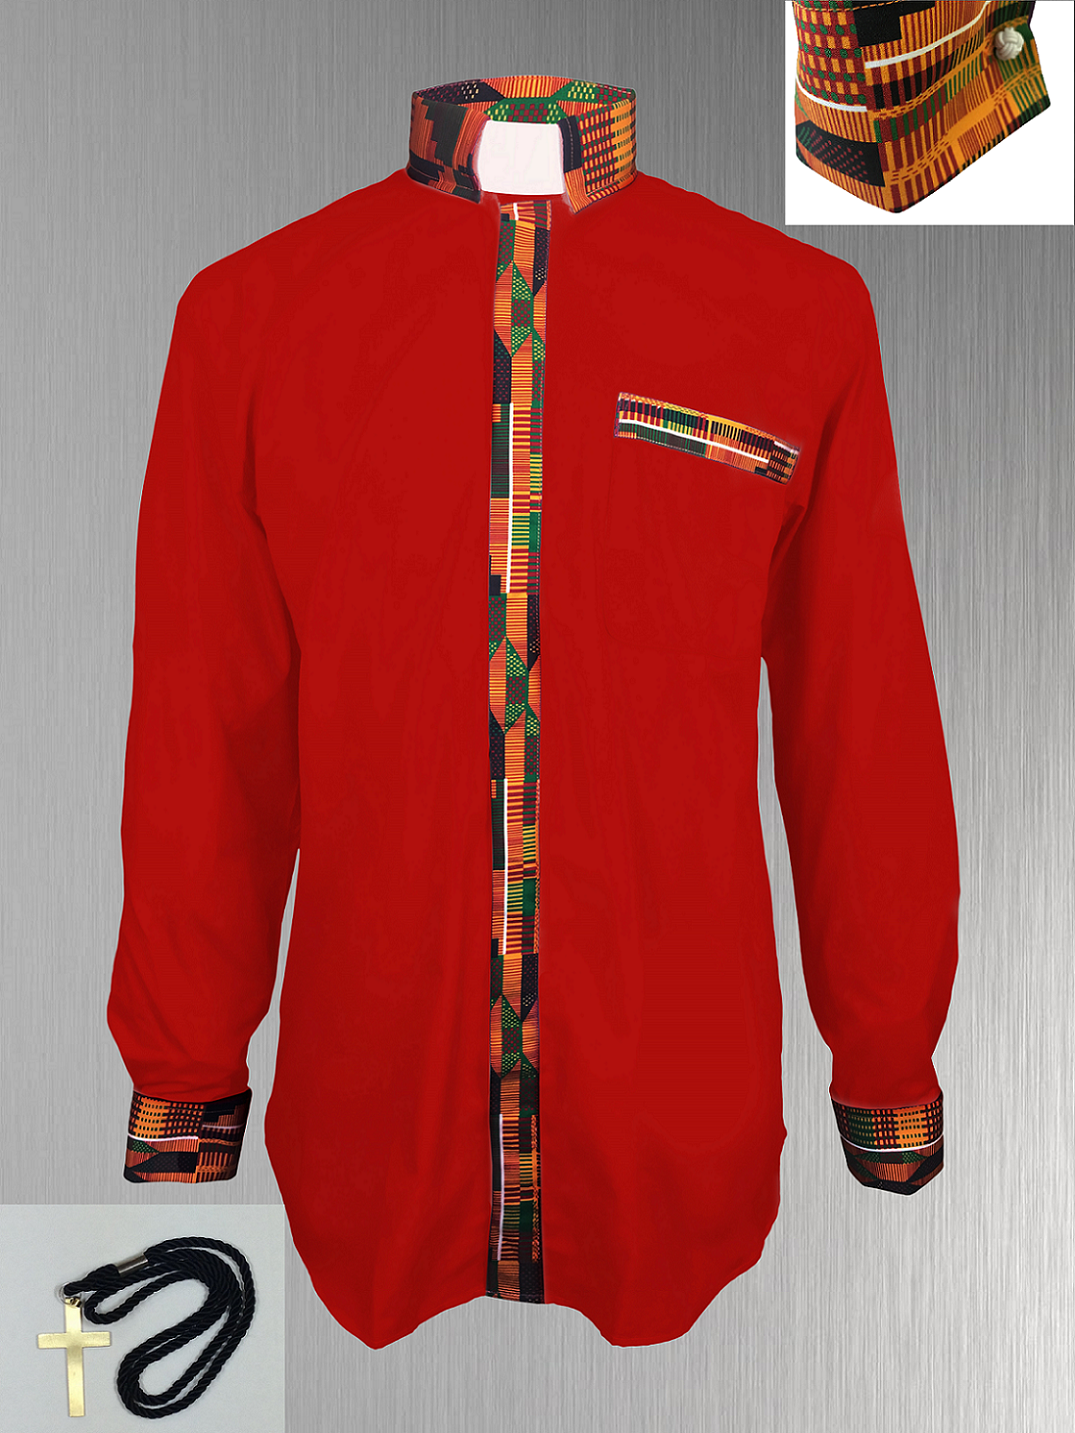 Red Clergy Shirt with African Kente Cloth Fabric